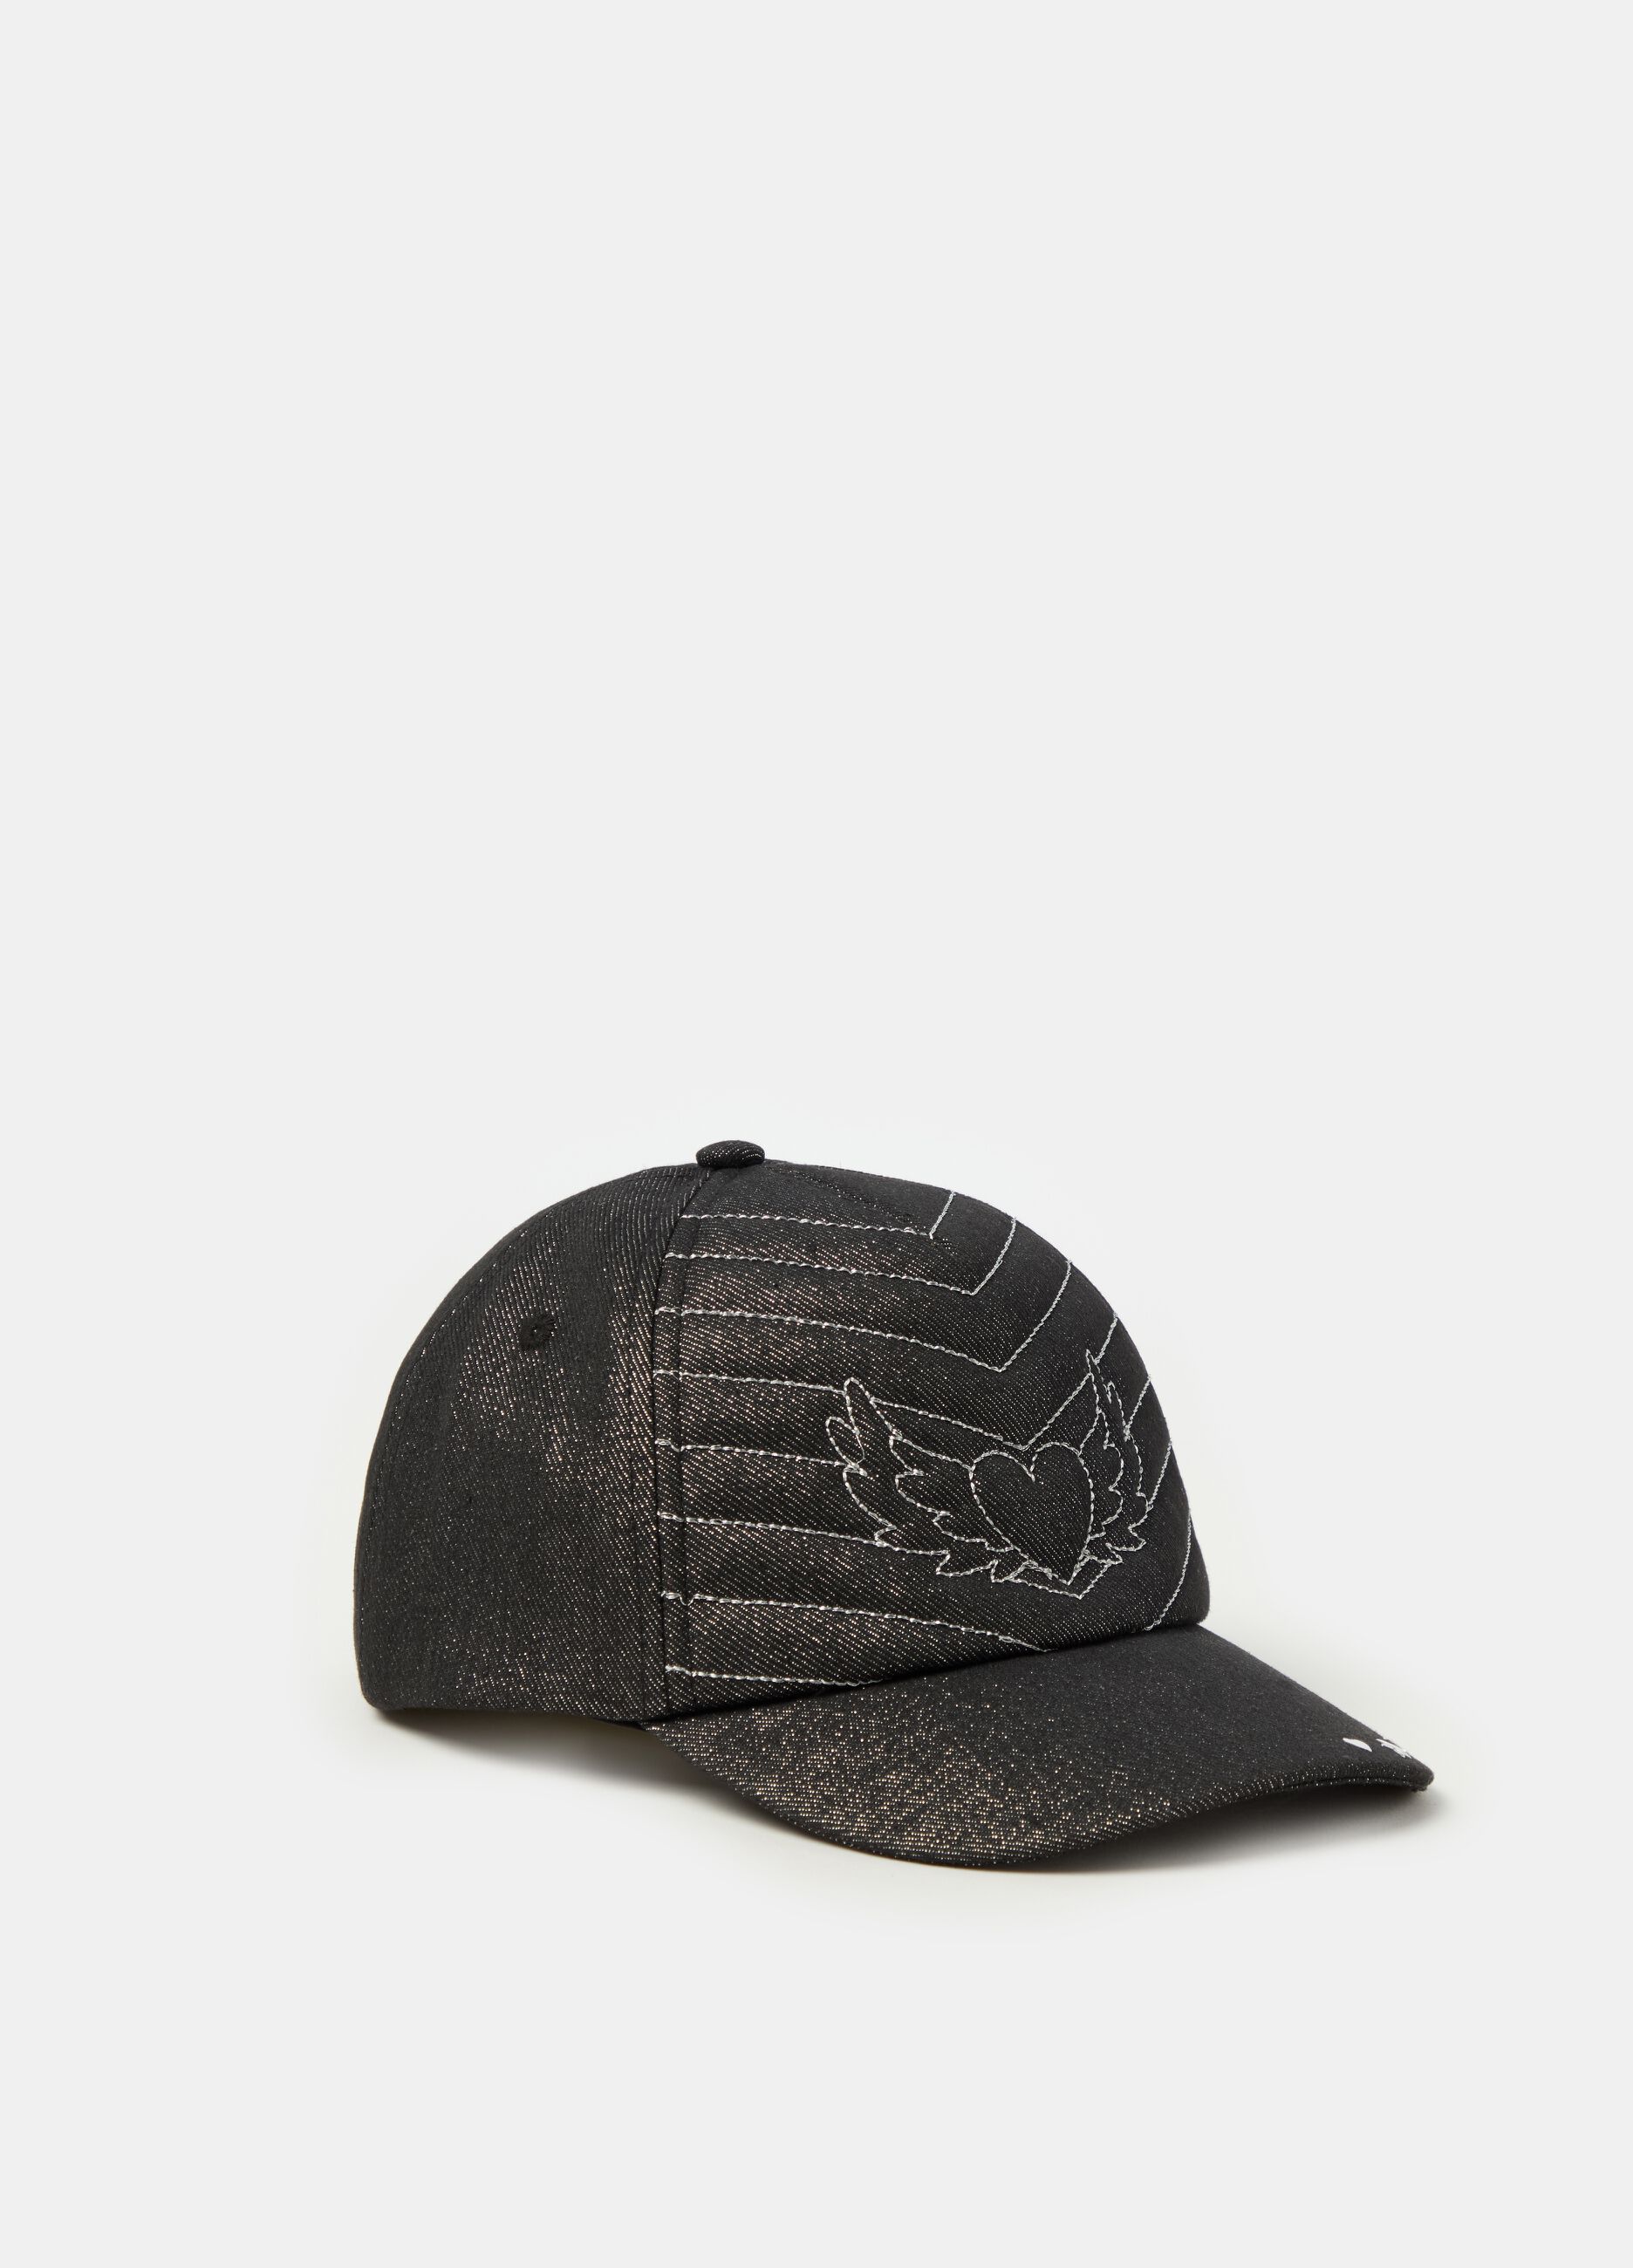 Baseball cap with winged heart embroidery